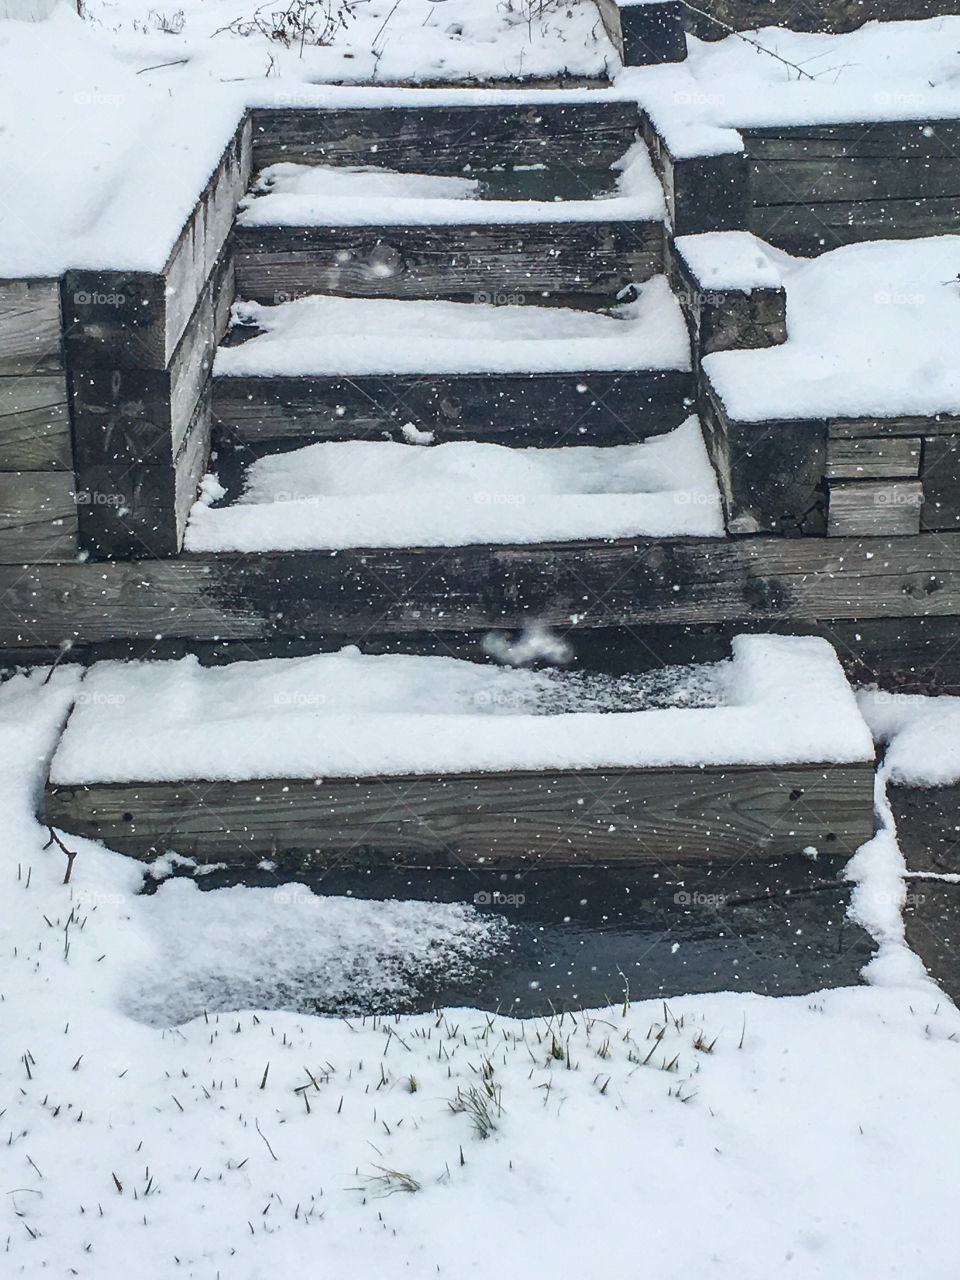 Snowy wooden stairs